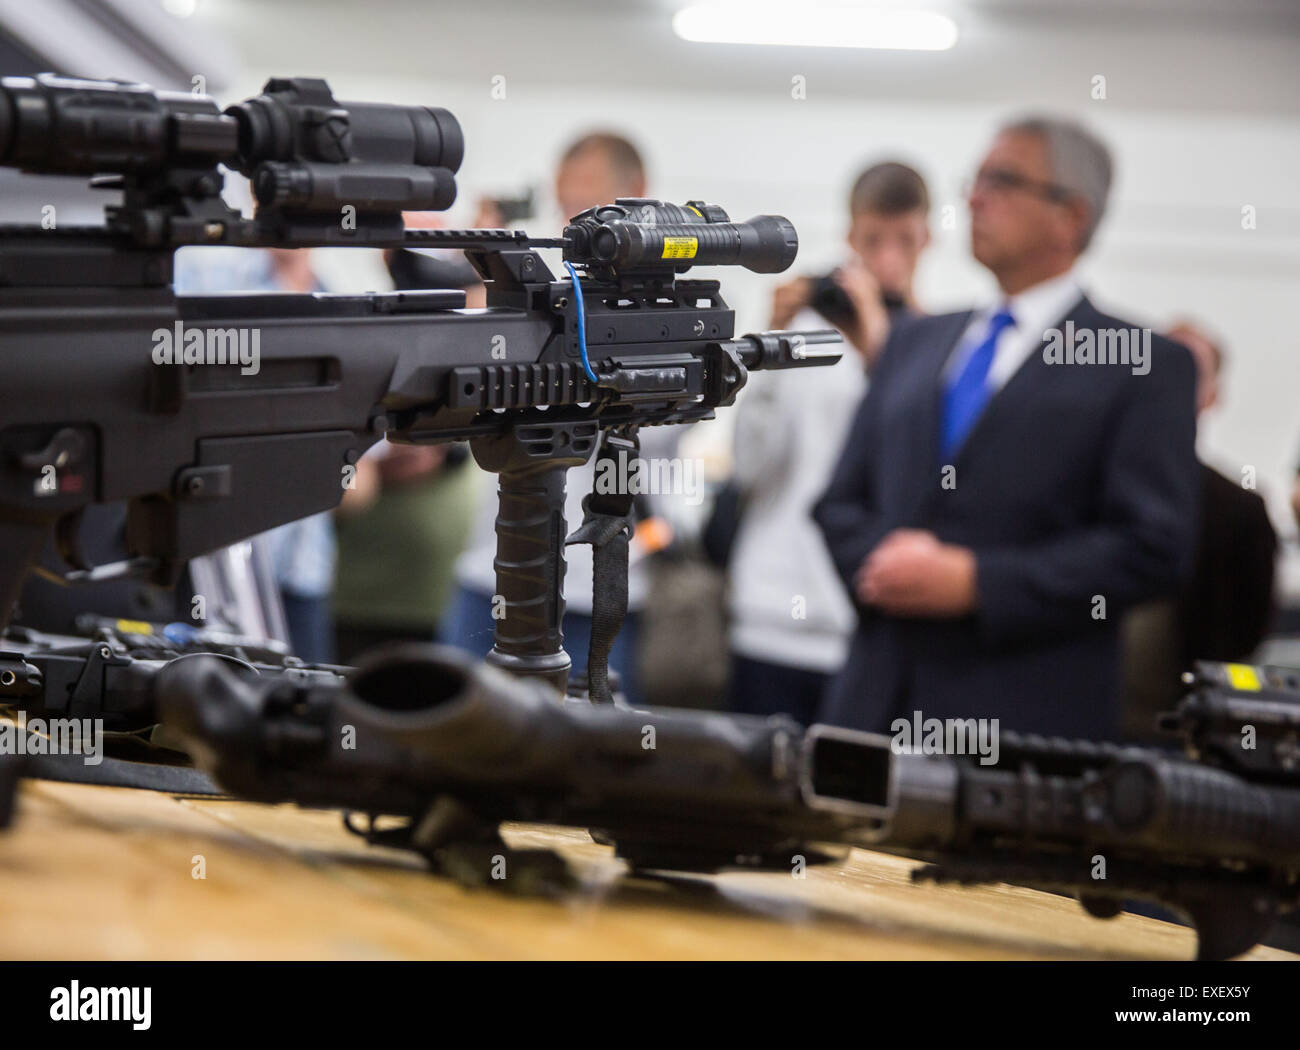 Mainz-Hechtsheim, Germany. 13th July, 2015. A machine gun and an automatic pistol lay on a table at a special presentation at a press conference in Mainz-Hechtsheim, Germany, 13 July 2015. The State Inner Minister for Rheinland-Palantine Roger Lewentz (SPD, r) presented earlier some consequences of a possible terrorist attacks with the heads of the SEK and the MEK (Mobiles Einsatz Kommando) forces. Issues such a as changes in the equipment, the functions and organization of the special forces have also been addressed. Photo:FRANK RUMPENHORST/dpa/Alamy Live News Stock Photo